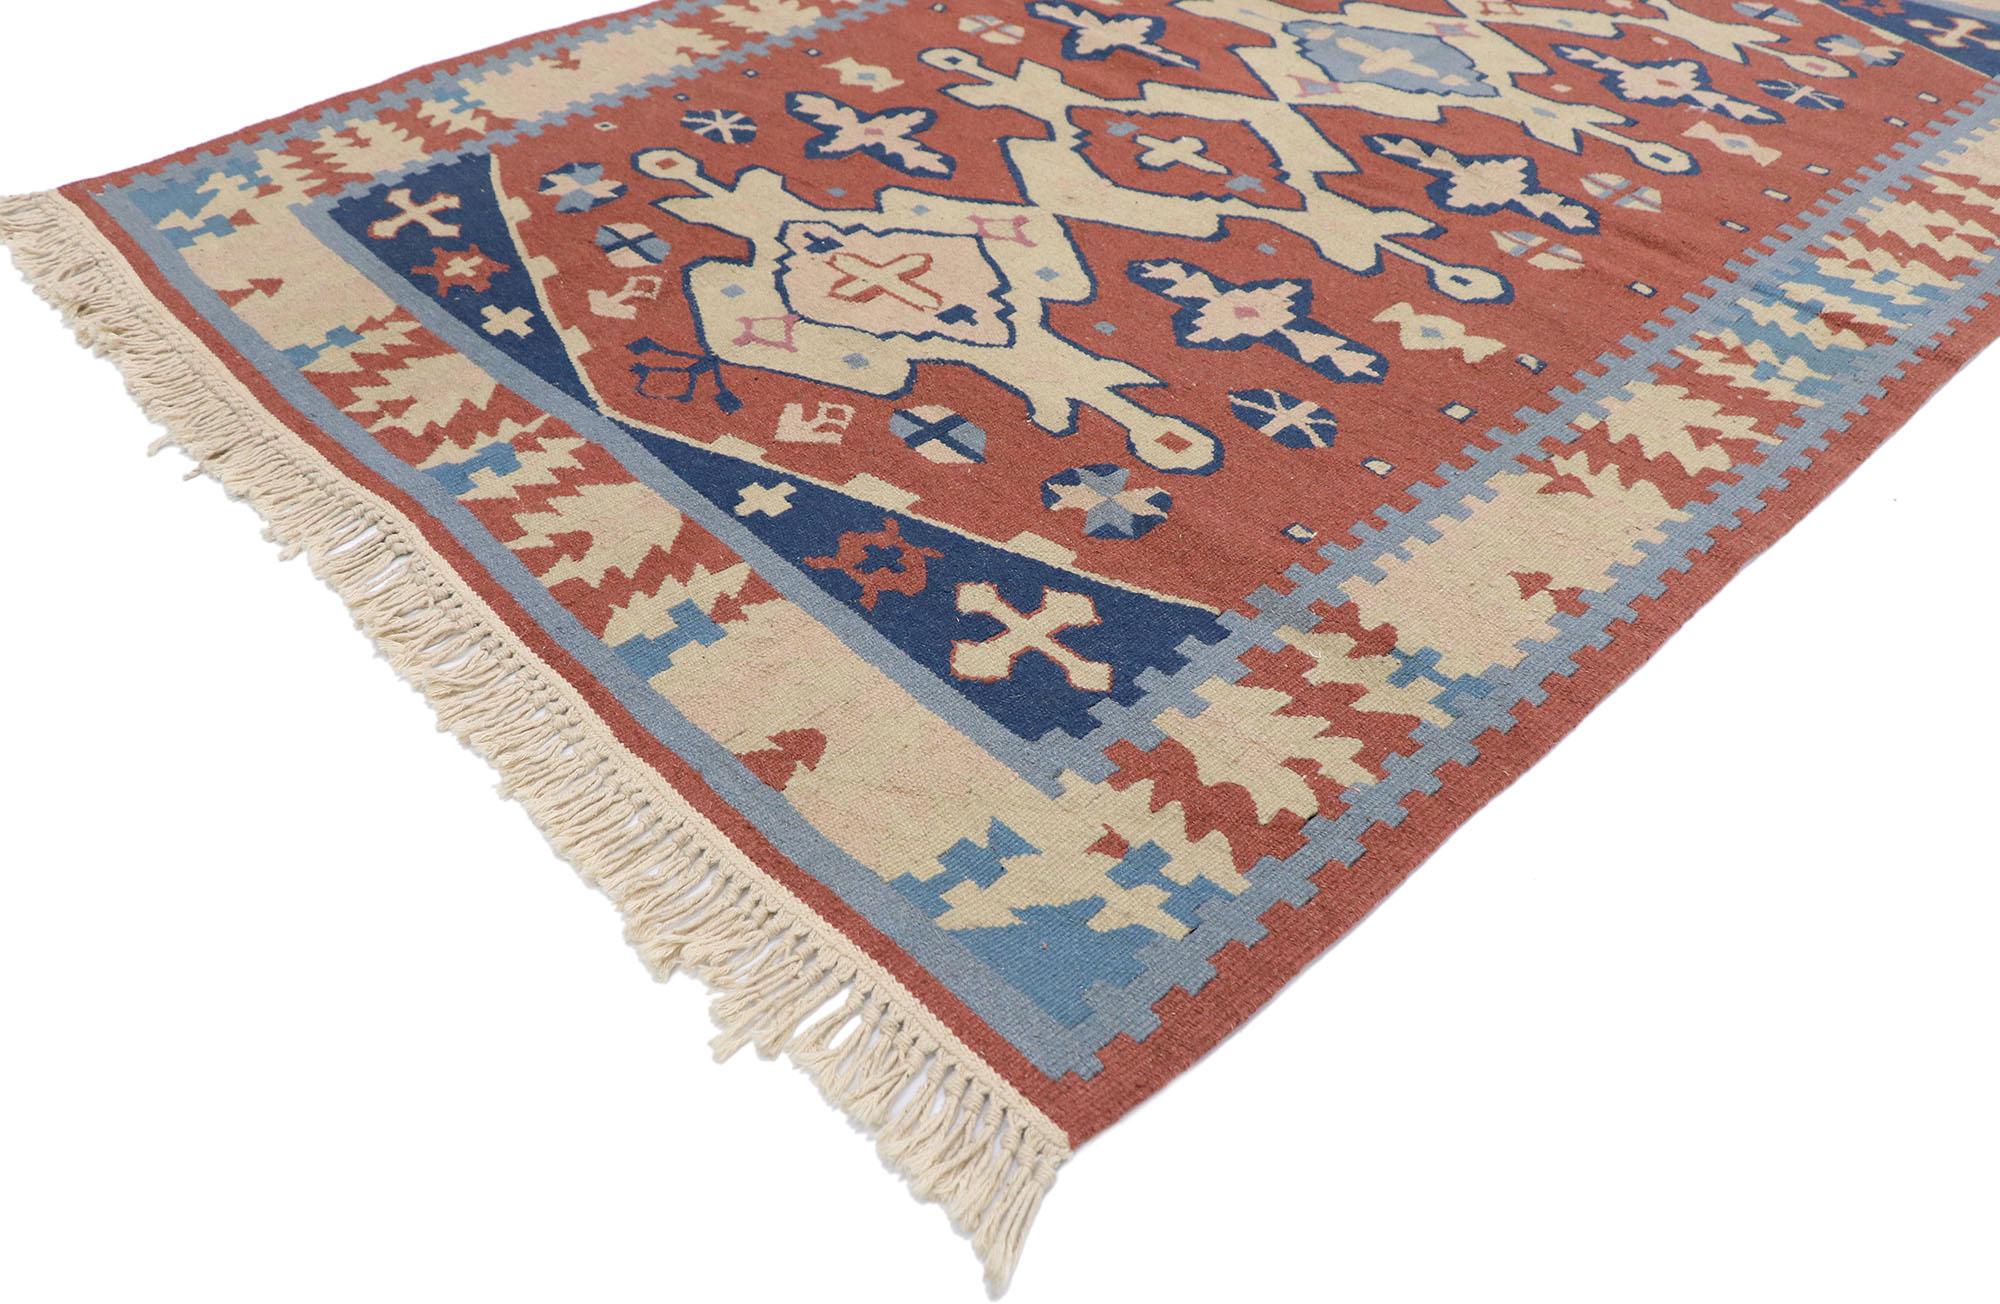 77800, vintage Persian Shiraz Kilim rug with Rustic Tribal style. Full of tiny details and a bold expressive design combined with vibrant colors and tribal style, this hand-woven wool vintage Persian Shiraz Kilim rug is a captivating vision of woven